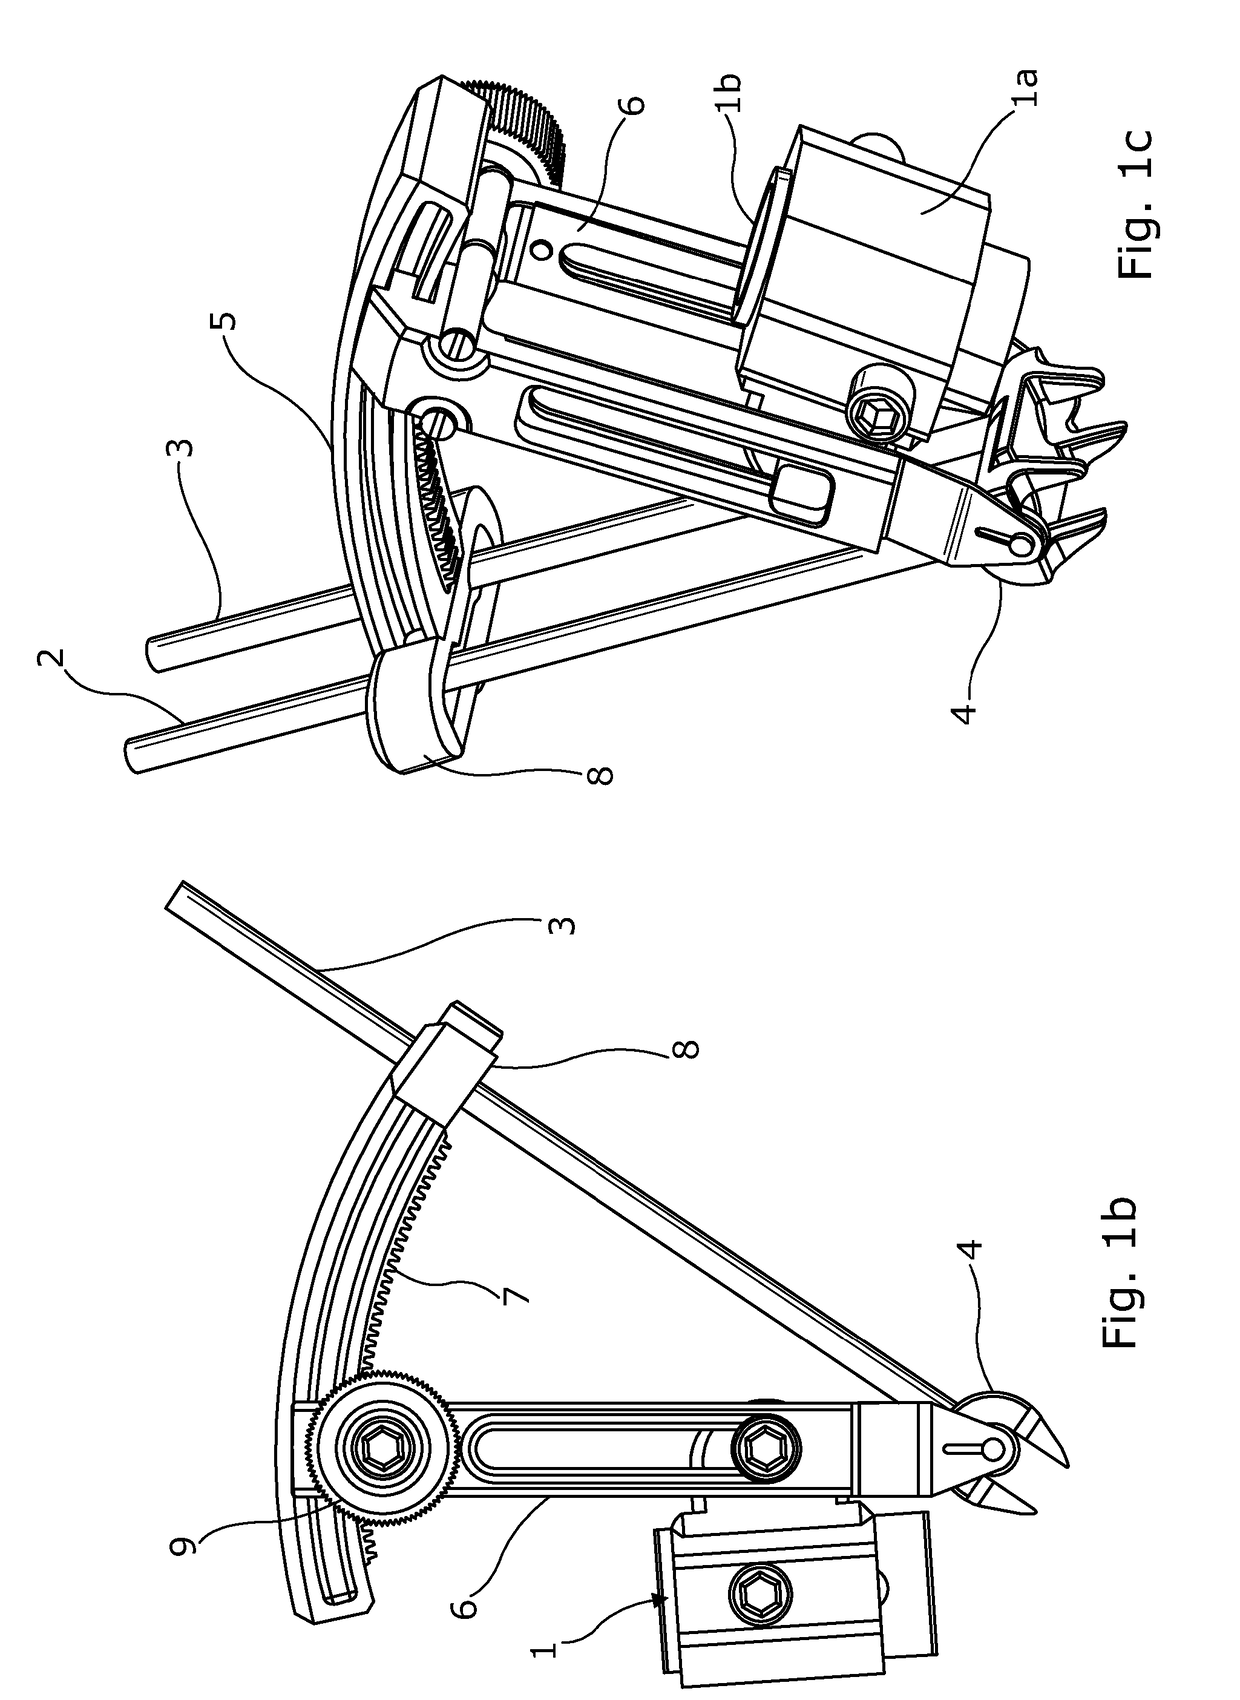 Apparatus for Use in Surgery